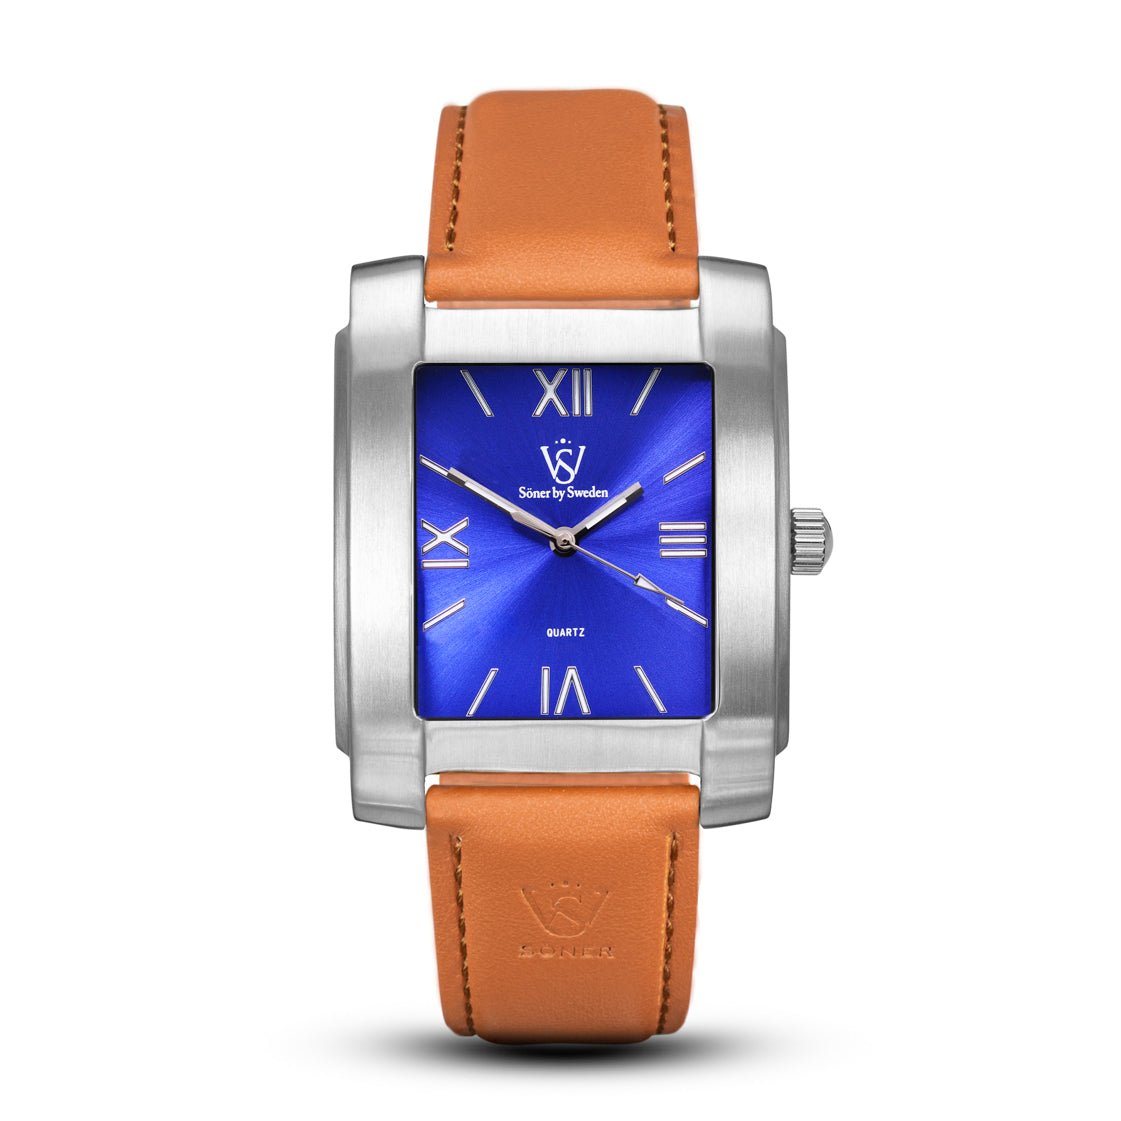 Stoclet, a square watch from söner watches with a brushed steel case and a radiant blue dial Light brown strap.